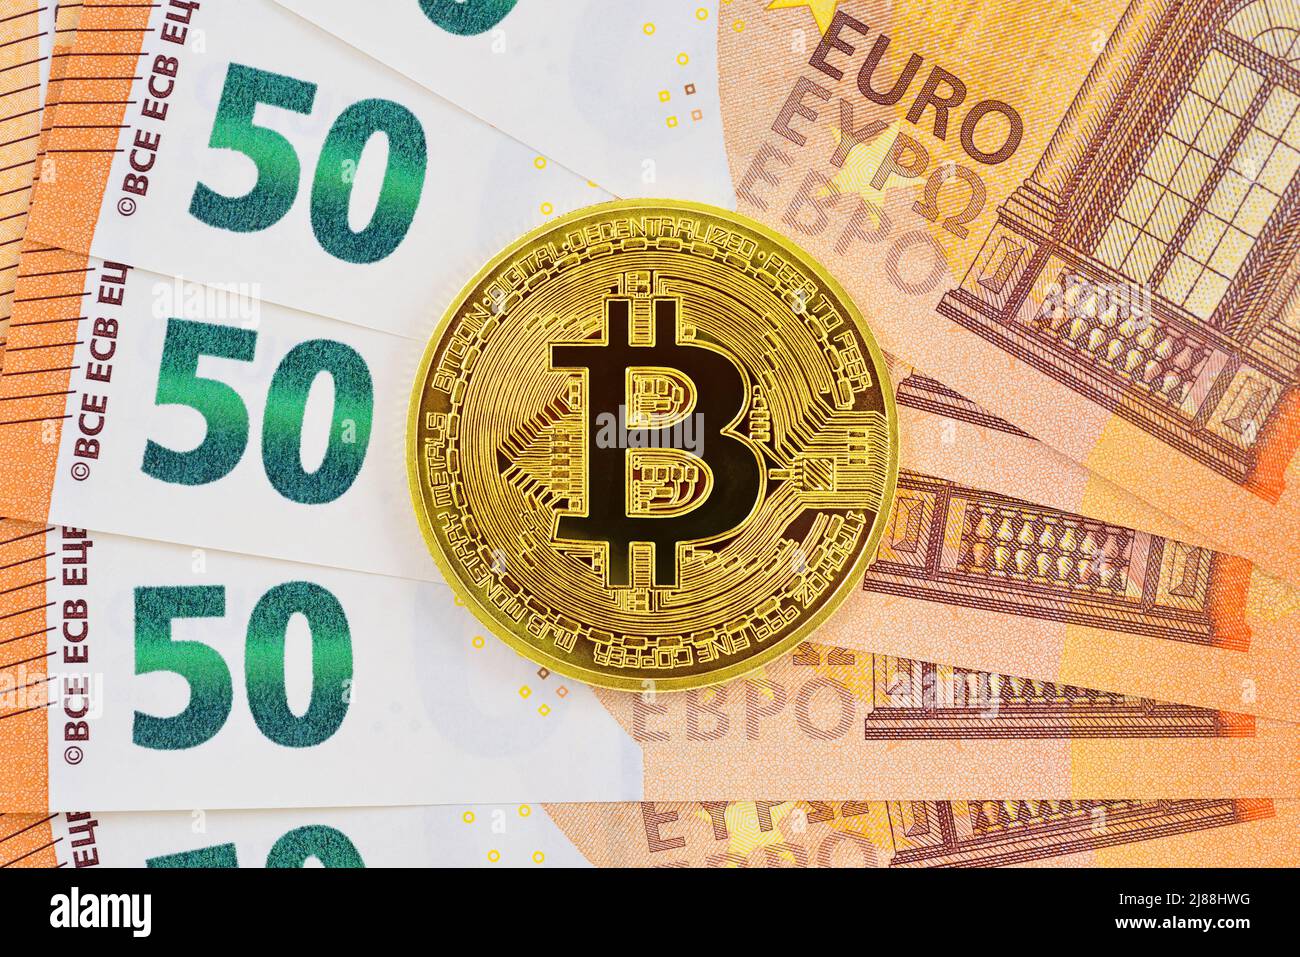 Buy 50 euro bitcoin why does bitstamp require proof of residency